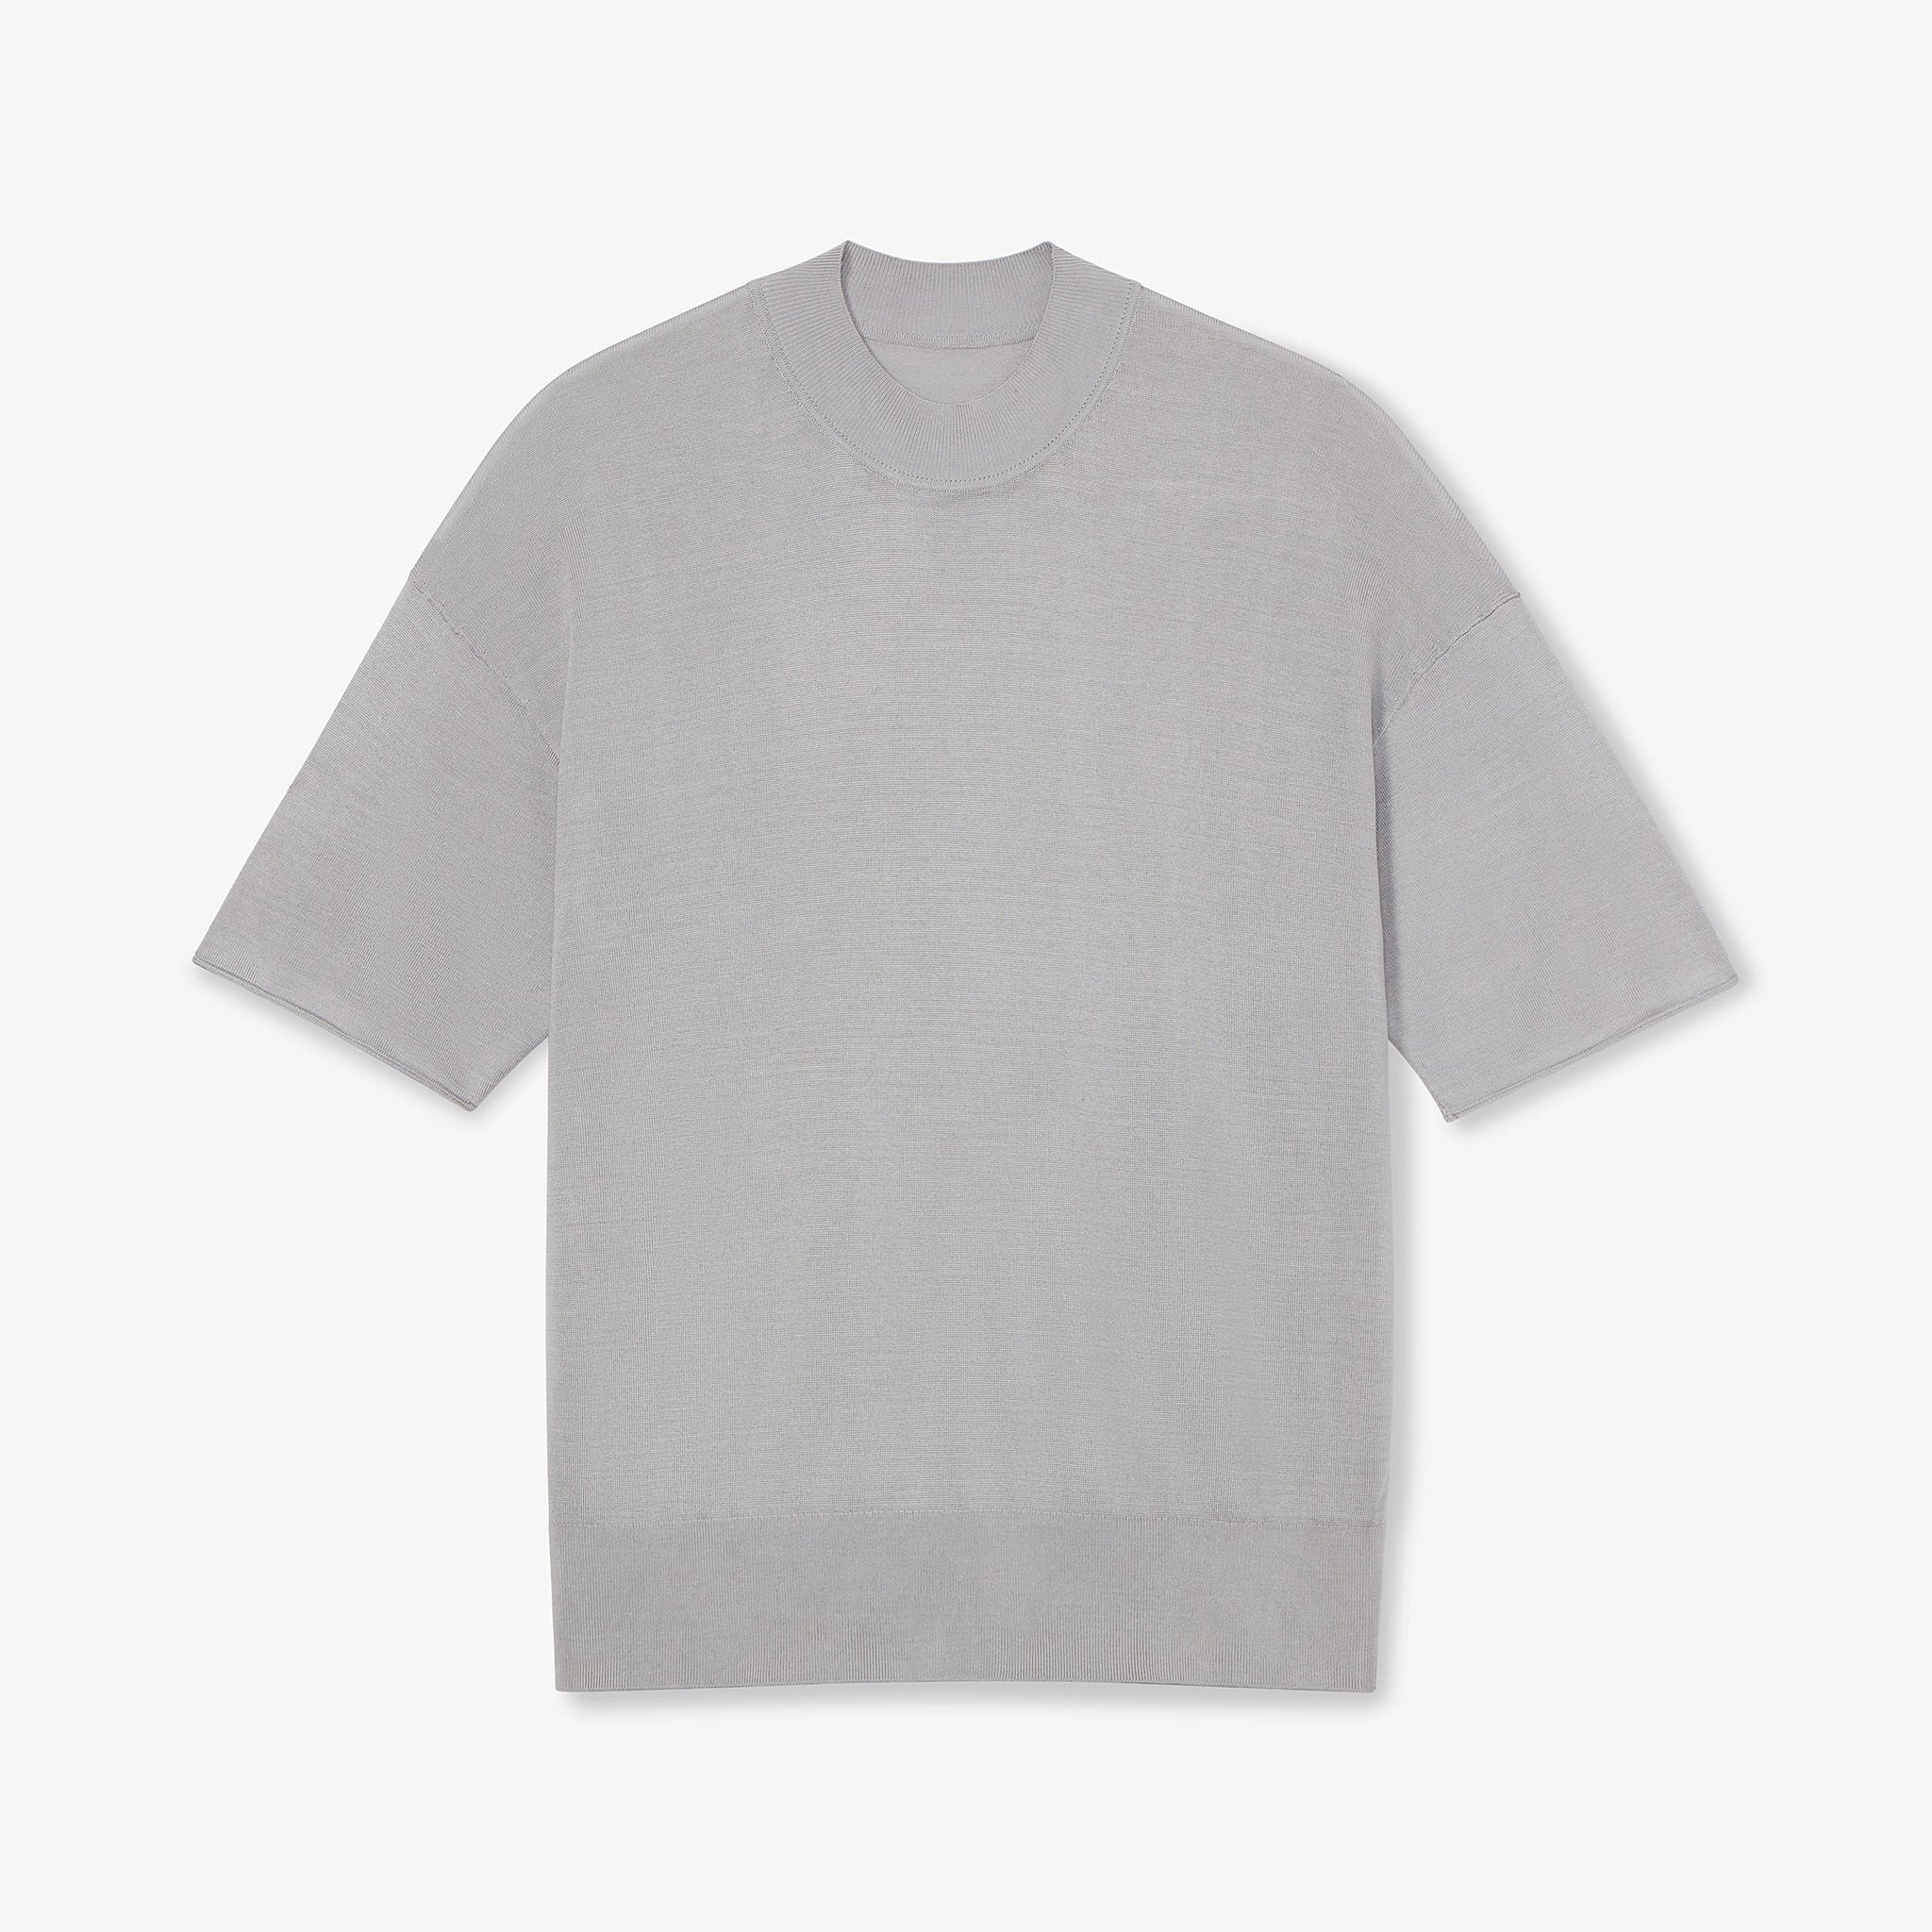 Packshot image of the mia top in silk jersey in pale gray